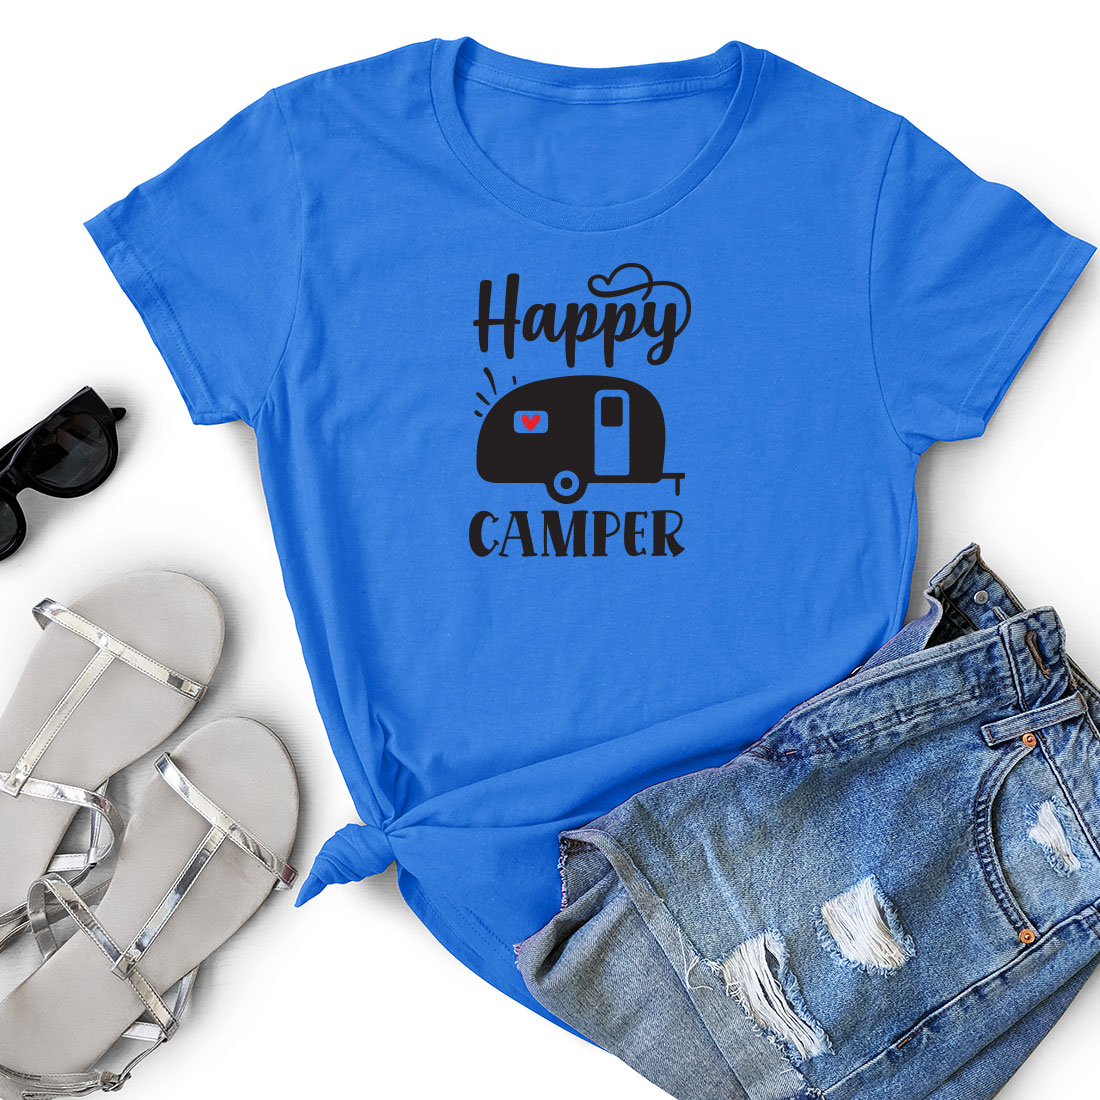 Blue shirt that says happy camper next to a pair of shorts.